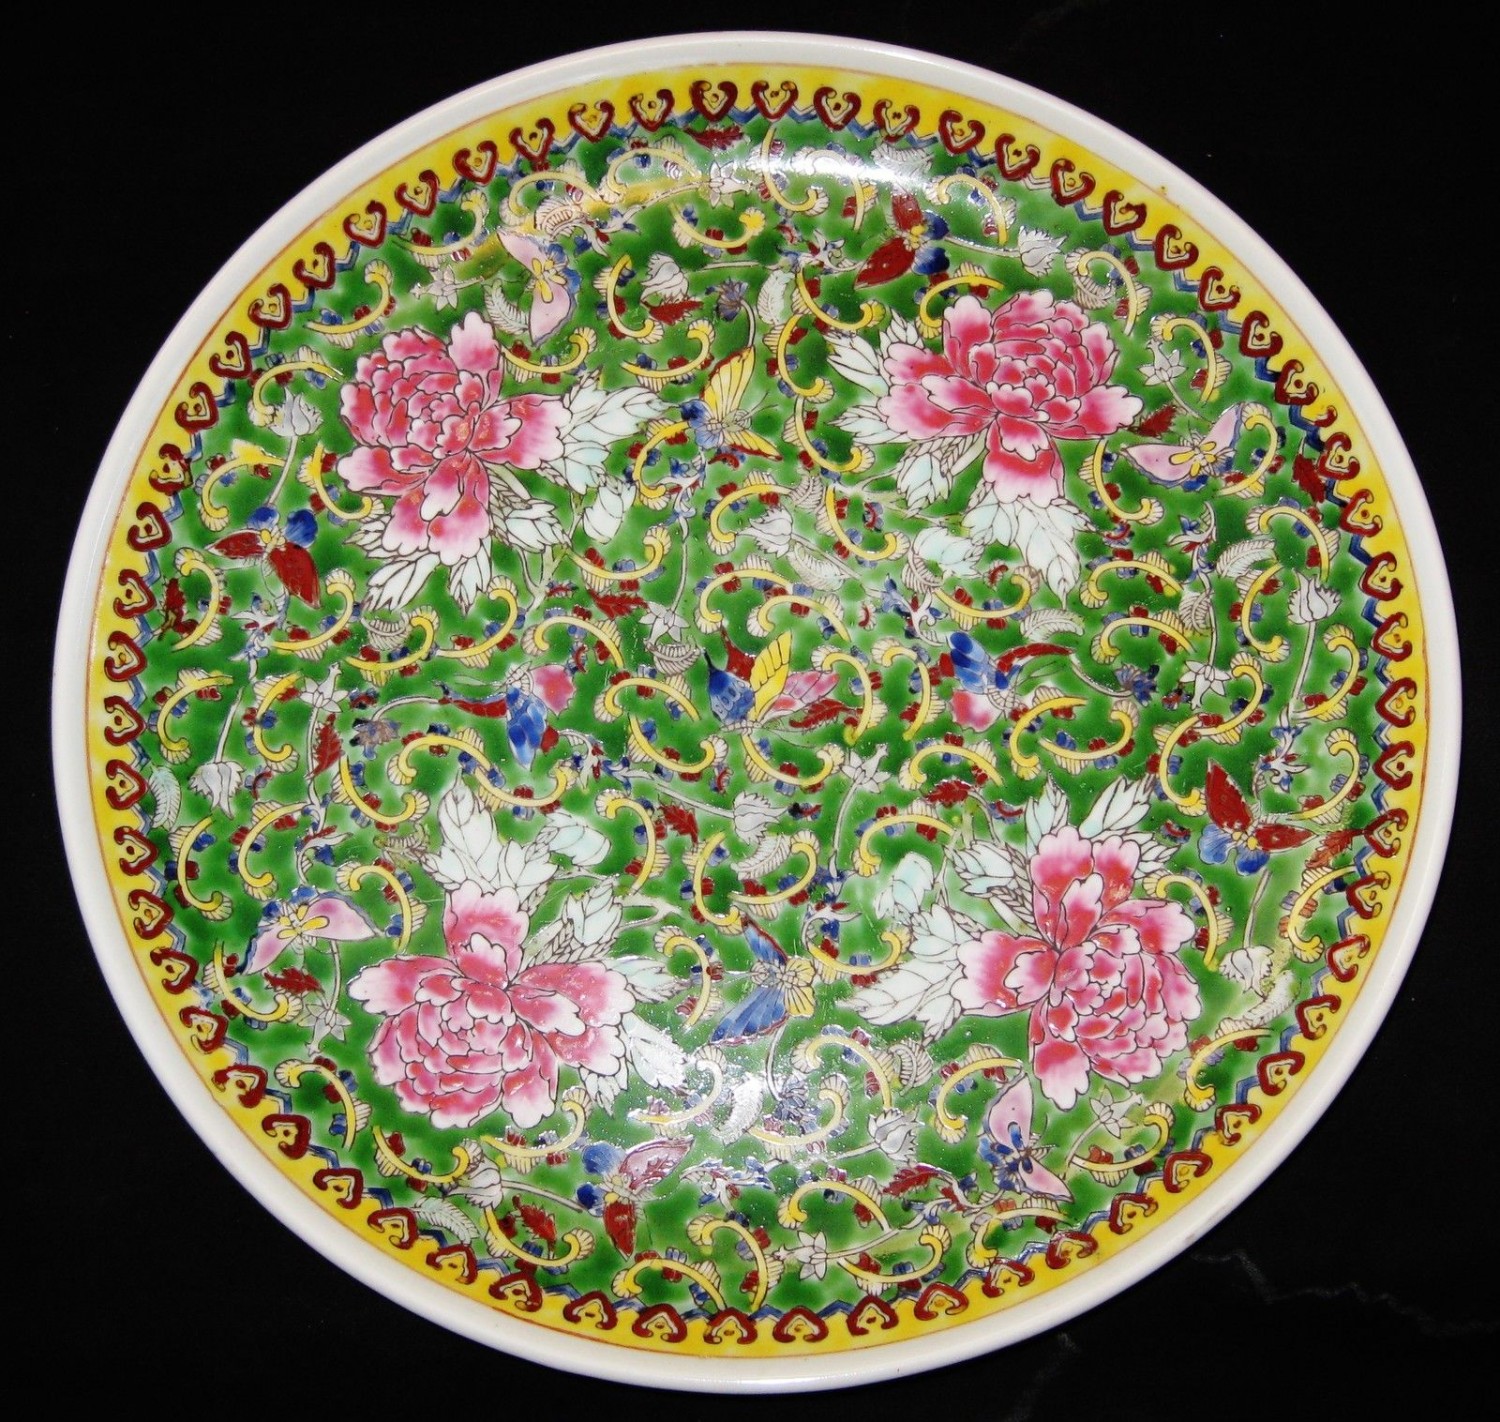 ANTIQUE CHINESE FAMILLE ROSE PORCELAIN CHARGER PLATE,19TH C., QIANLONG MARK.